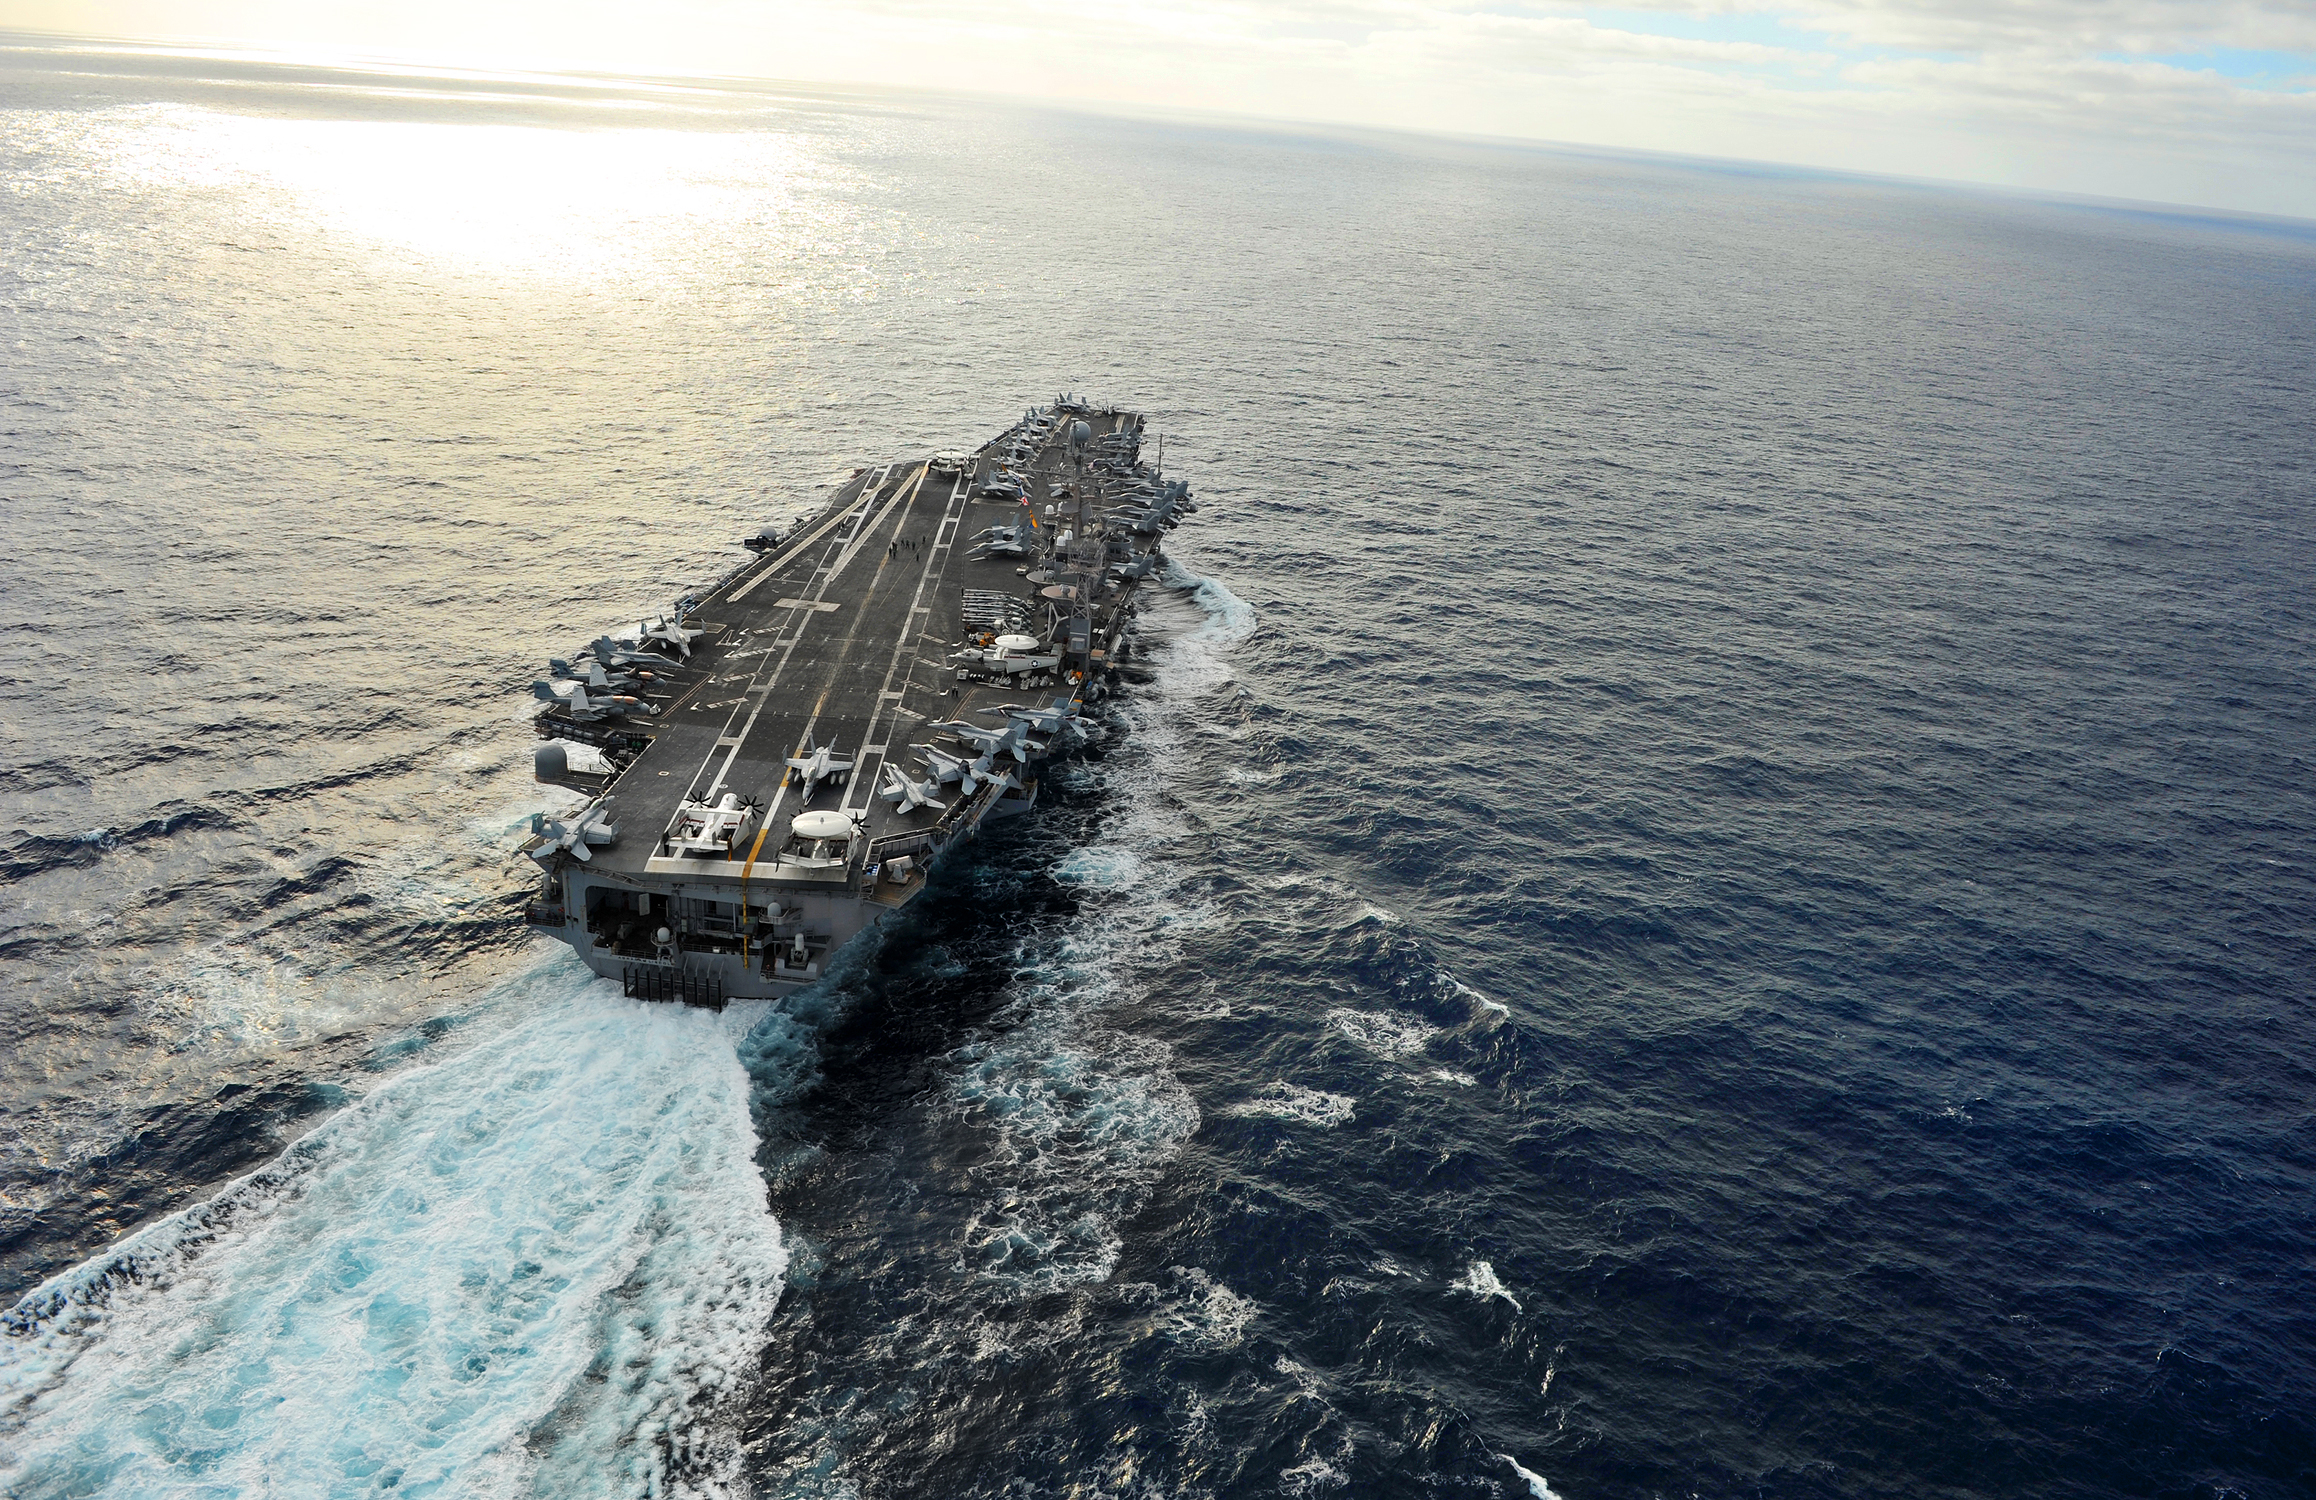 US Navy 111216-N-KQ416-391 The Nimitz-class aircraft carrier USS Abraham Lincoln (CVN 72) is underway on deployment to the 5th and 7th Fleet areas 